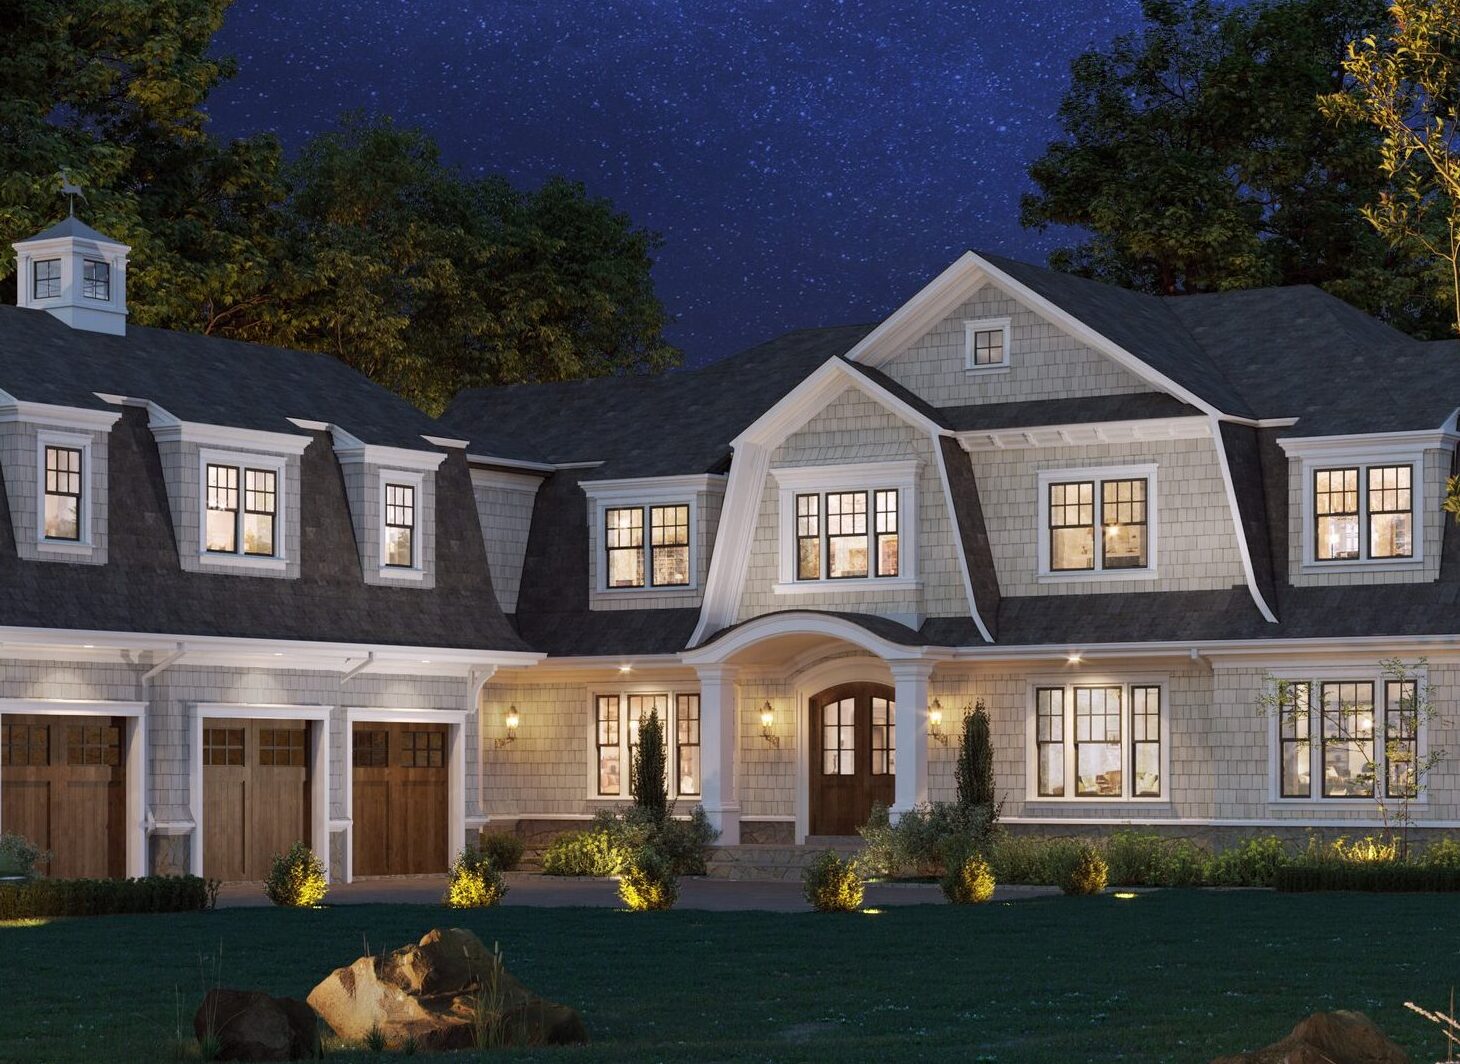 3D rendering of a shingled private house in the Wayne area, NJ, USA.